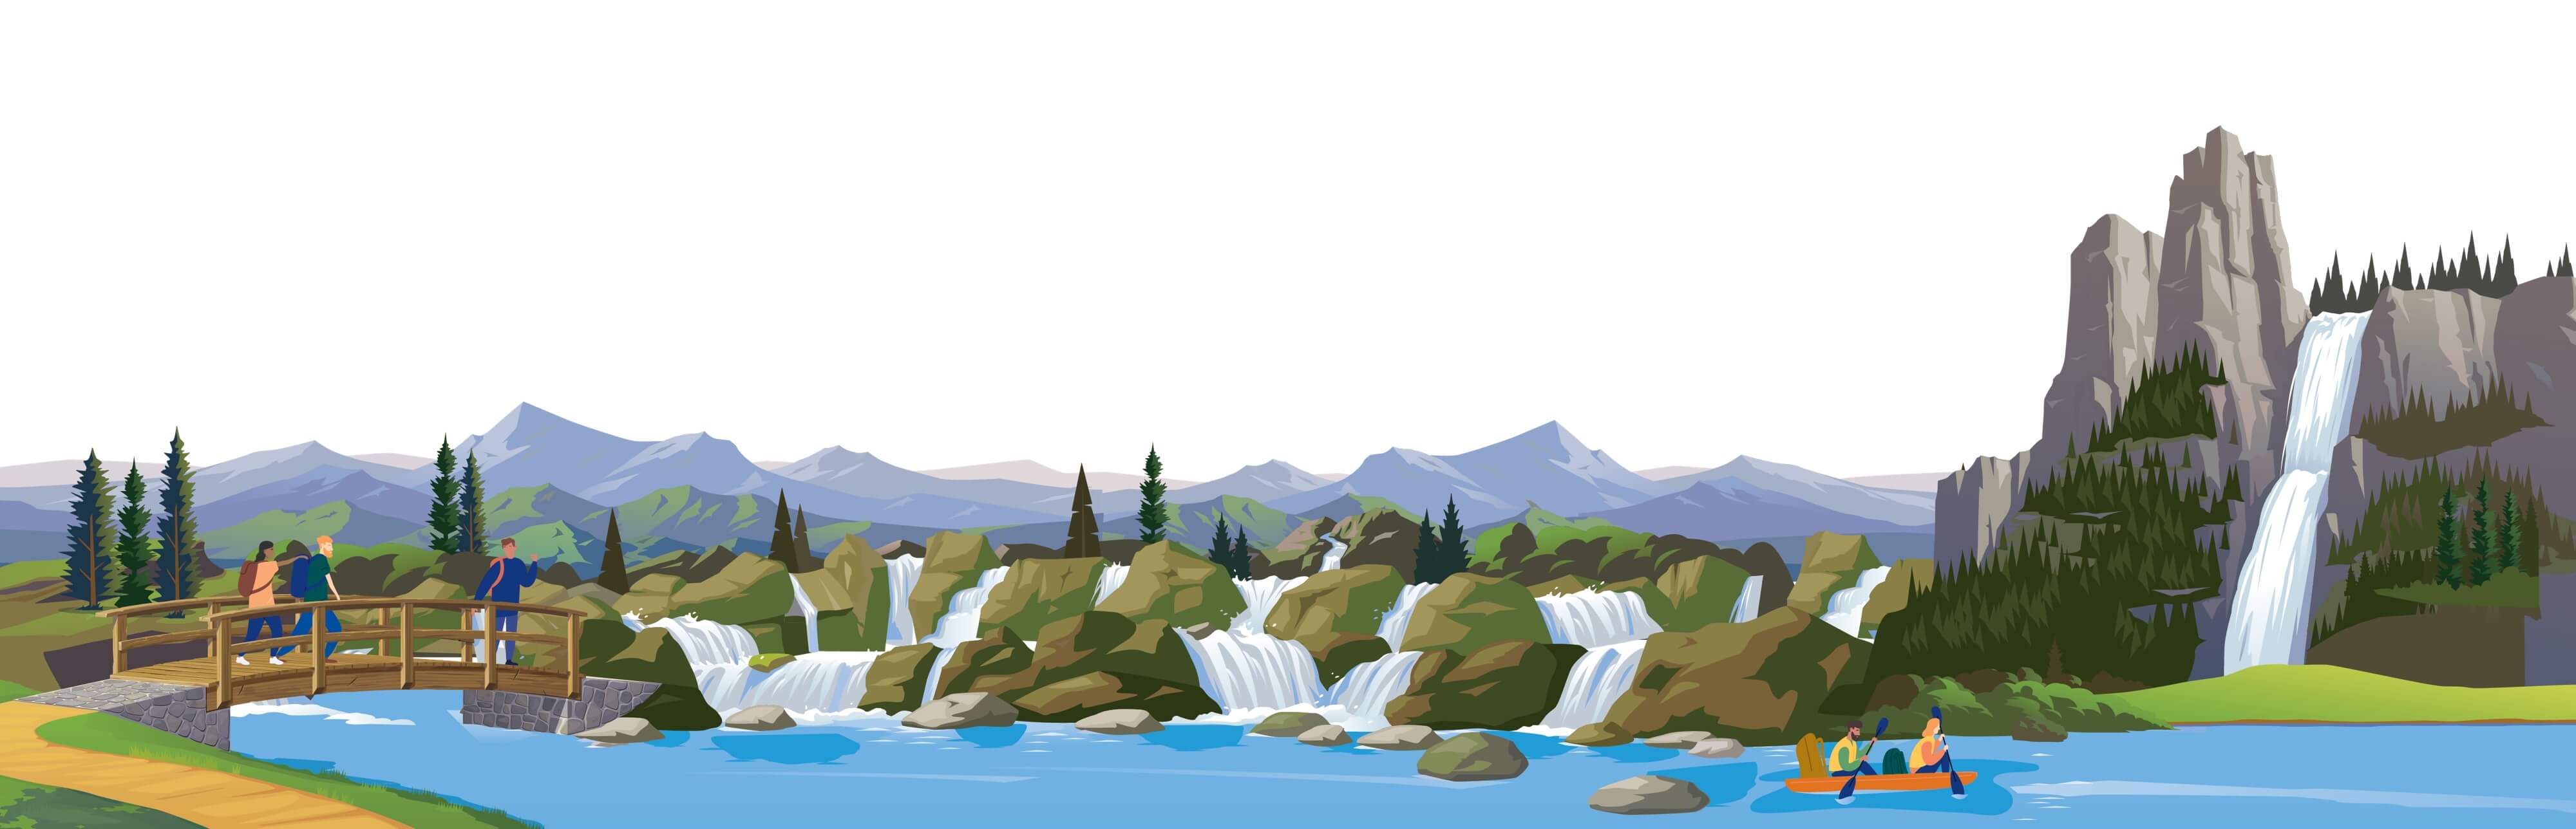 a vector illustration of a lake and scenery